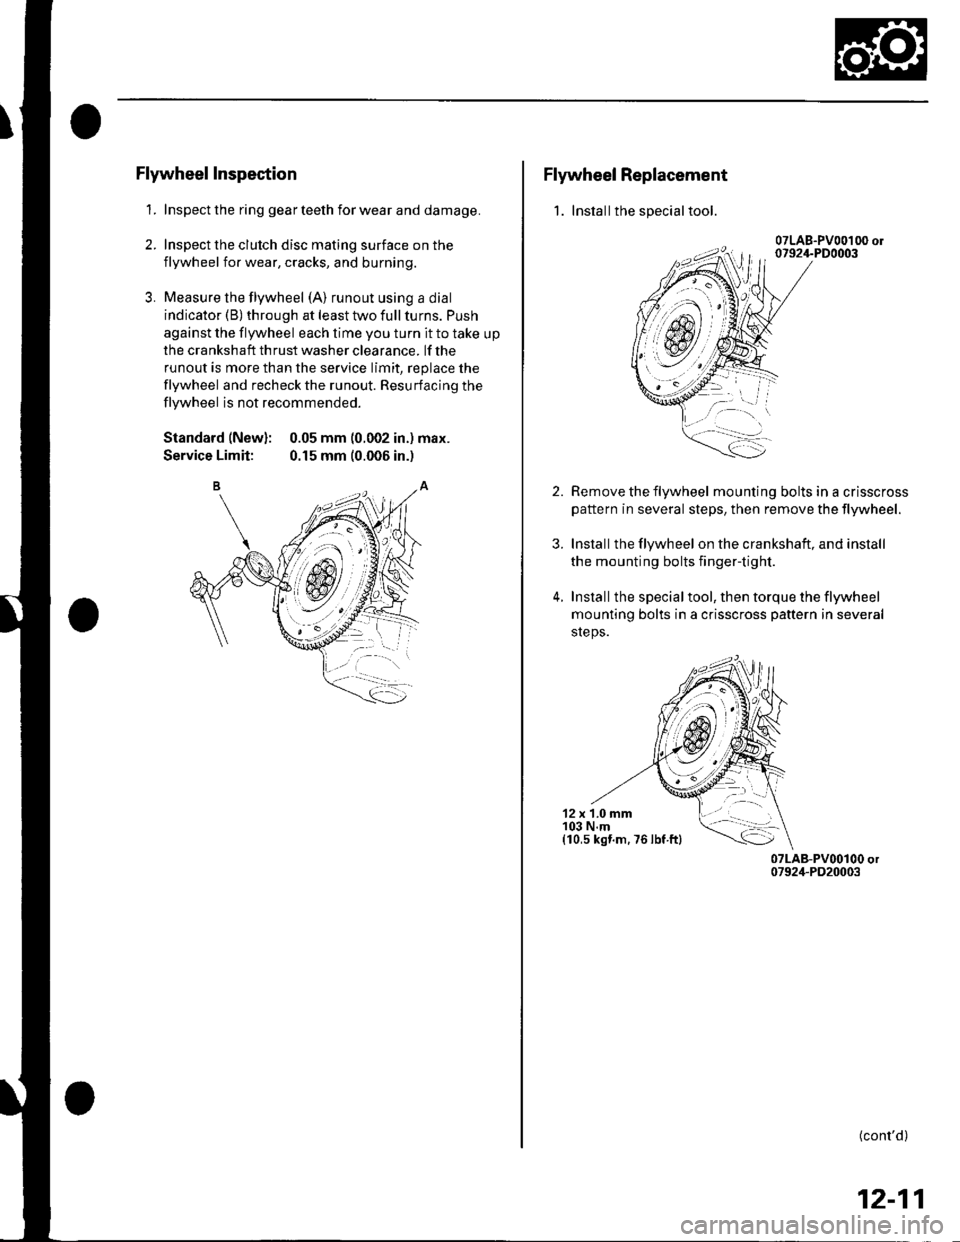 HONDA CIVIC 2003 7.G Workshop Manual Flywheel Inspection
1. Inspect the ring gear teeth for wear and damage.
2. Inspect the clutch disc mating surface on the
flywheel for wear, cracks, and burning.
3. Measure the flywheel (A) runout usin